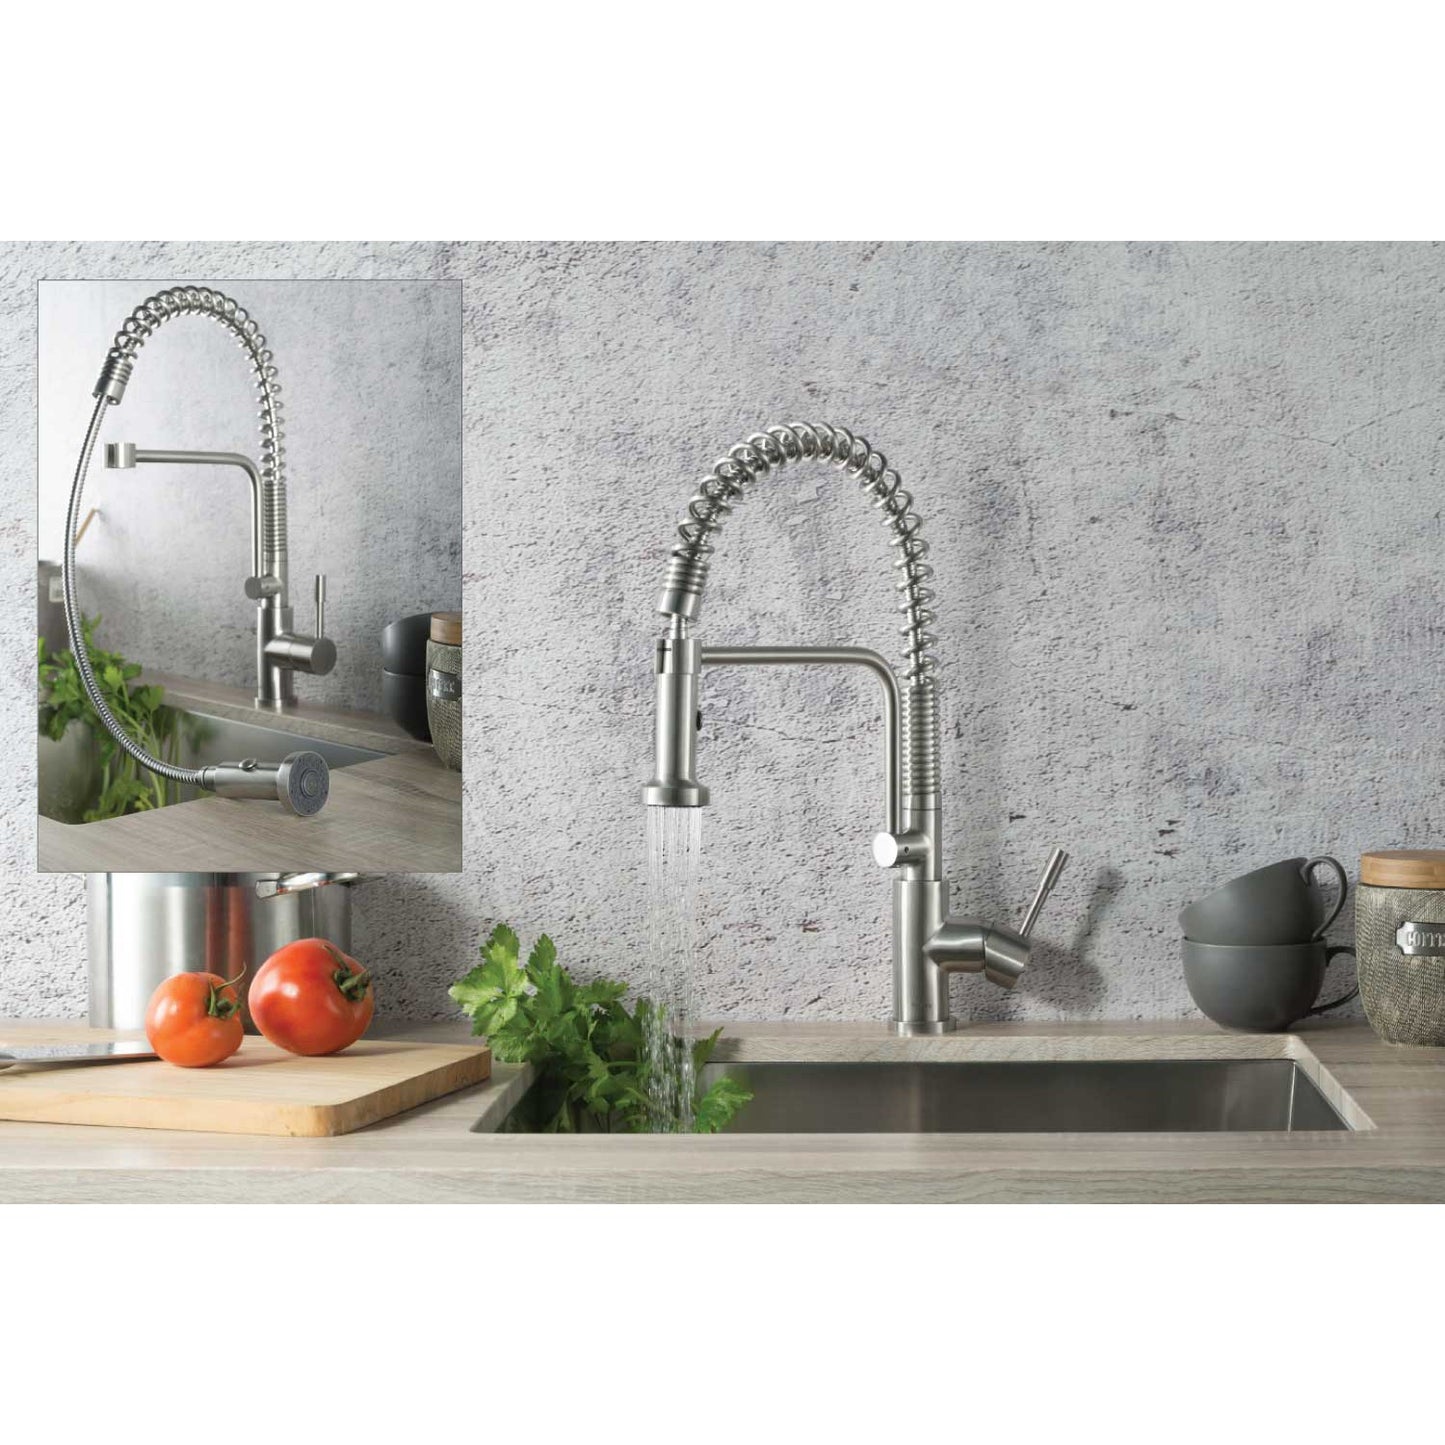 Isenberg Klassiker Caso 19" Single Hole Light Tan Semi-Professional Stainless Steel Pull-Down Kitchen Faucet With Dual Function Sprayer